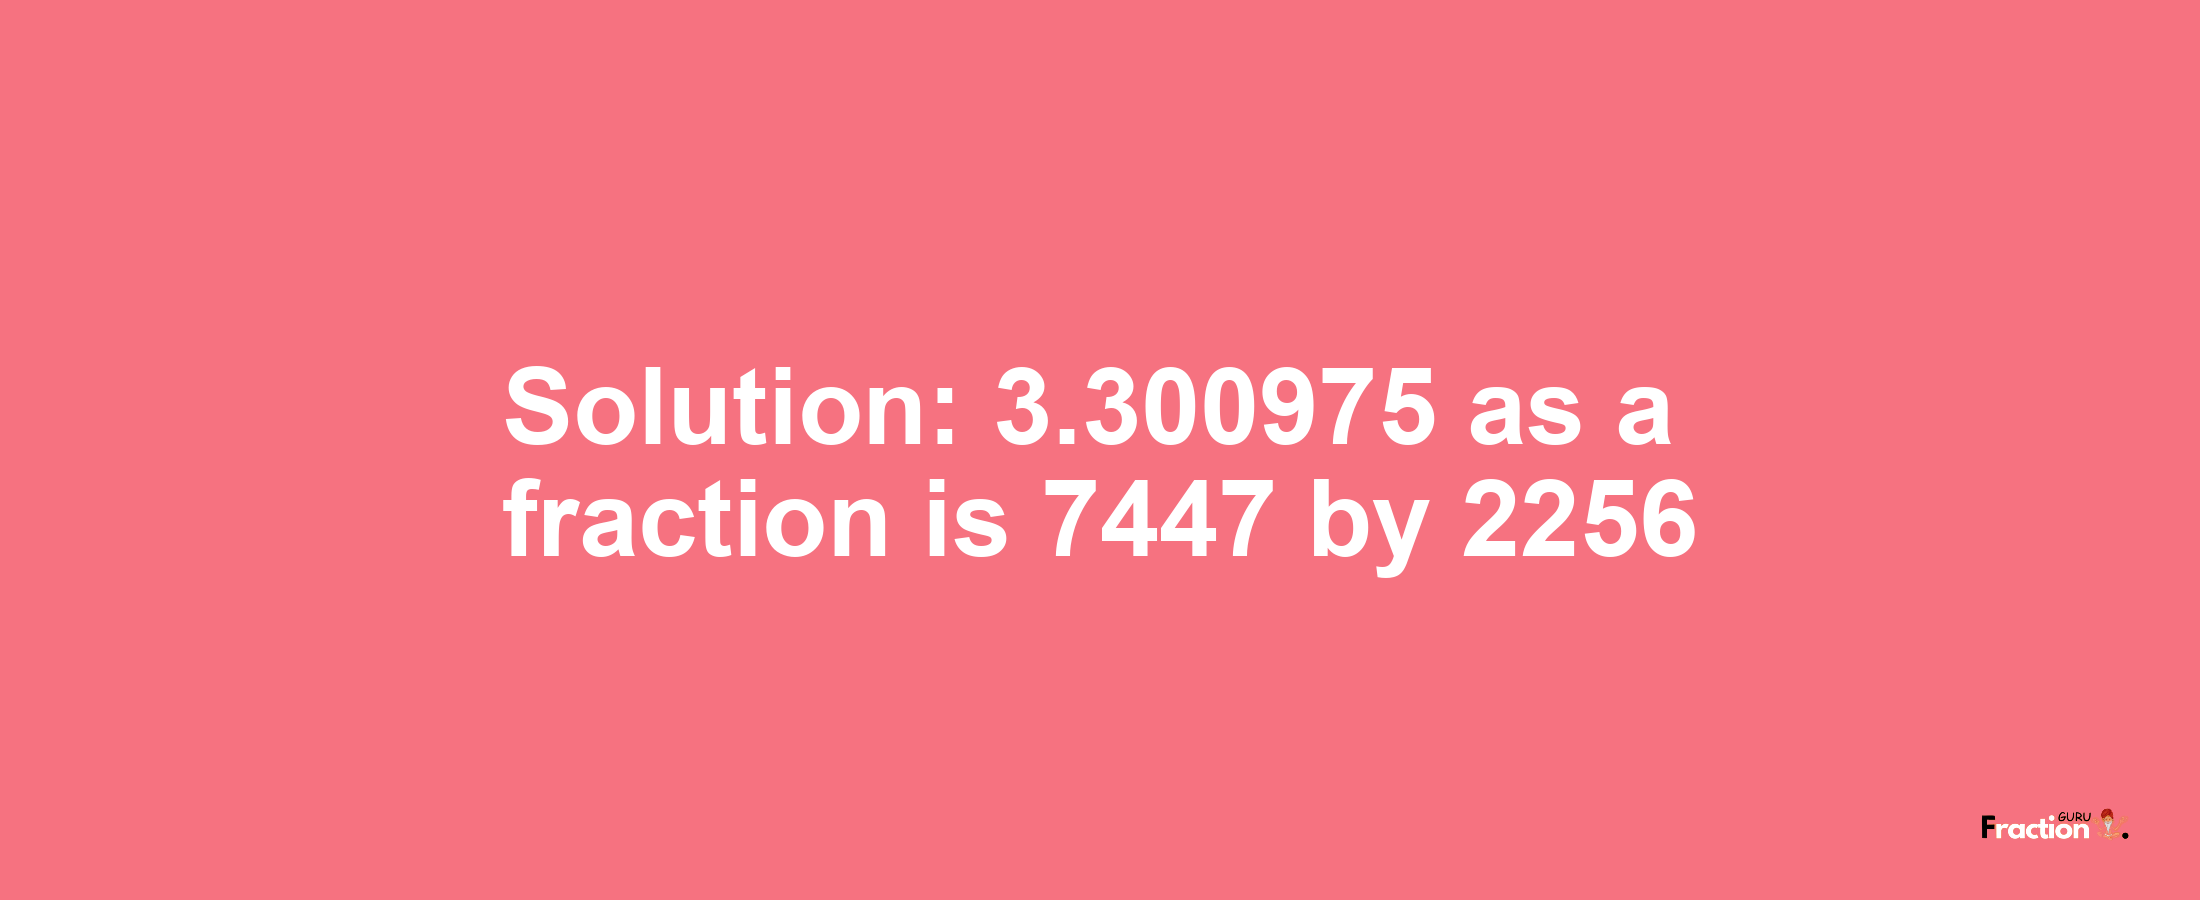 Solution:3.300975 as a fraction is 7447/2256